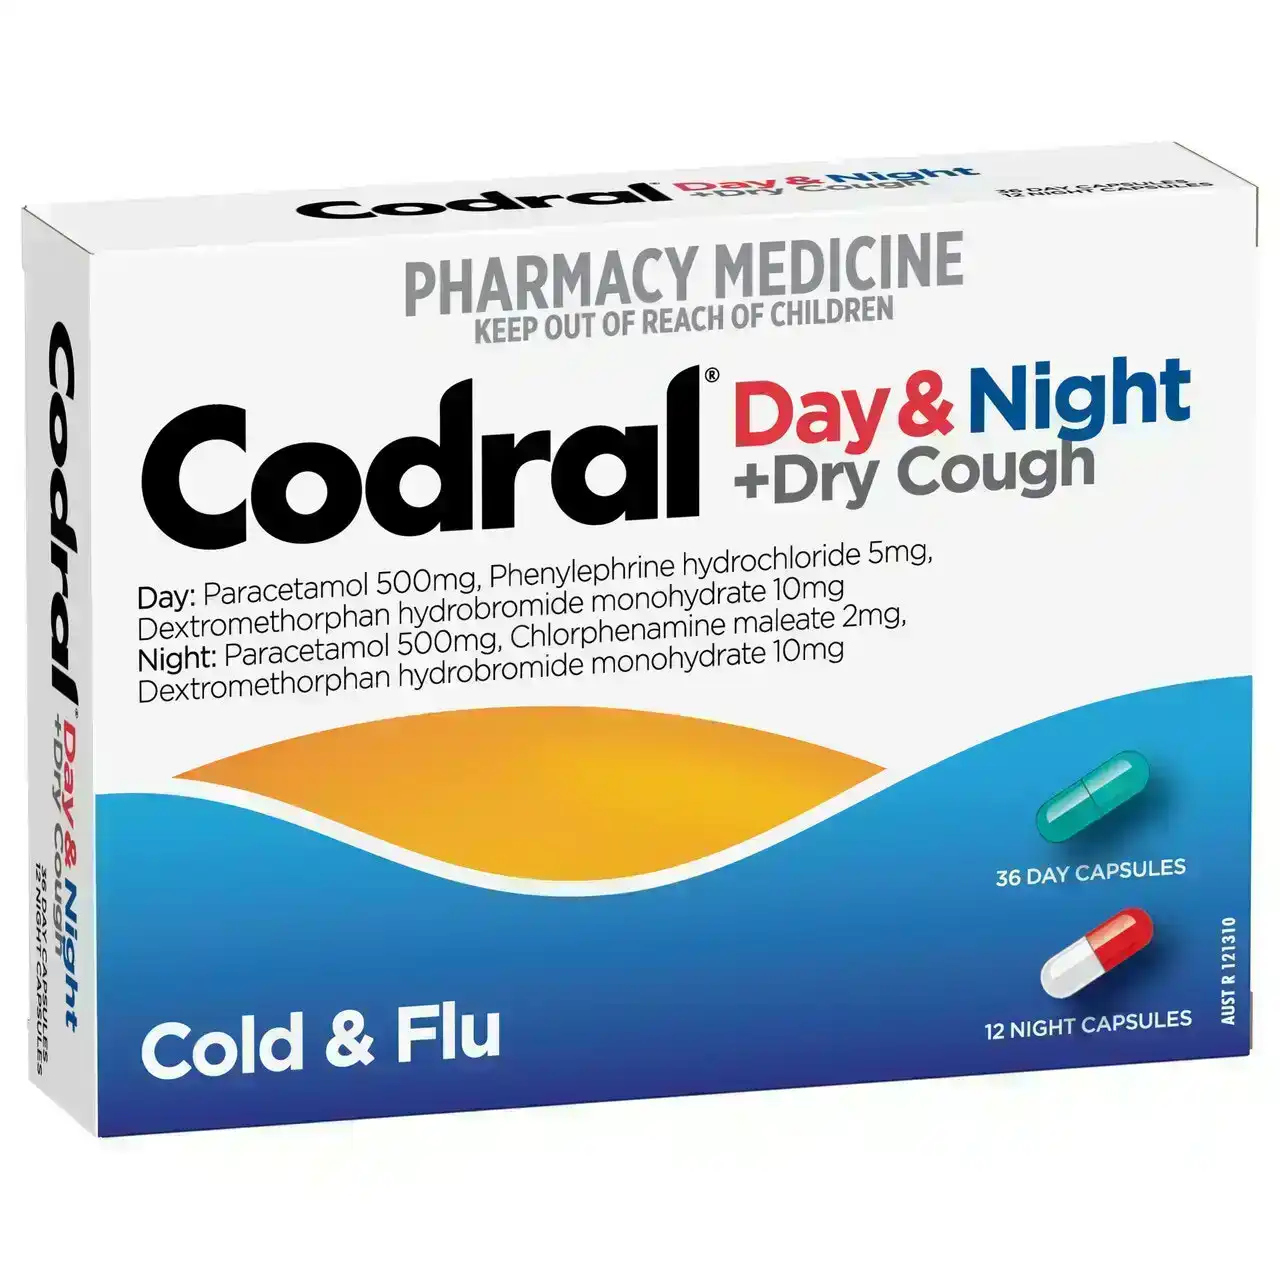 CODRAL Cold &amp; Flu + Cough Day &amp; Night Capsules 48 Pack